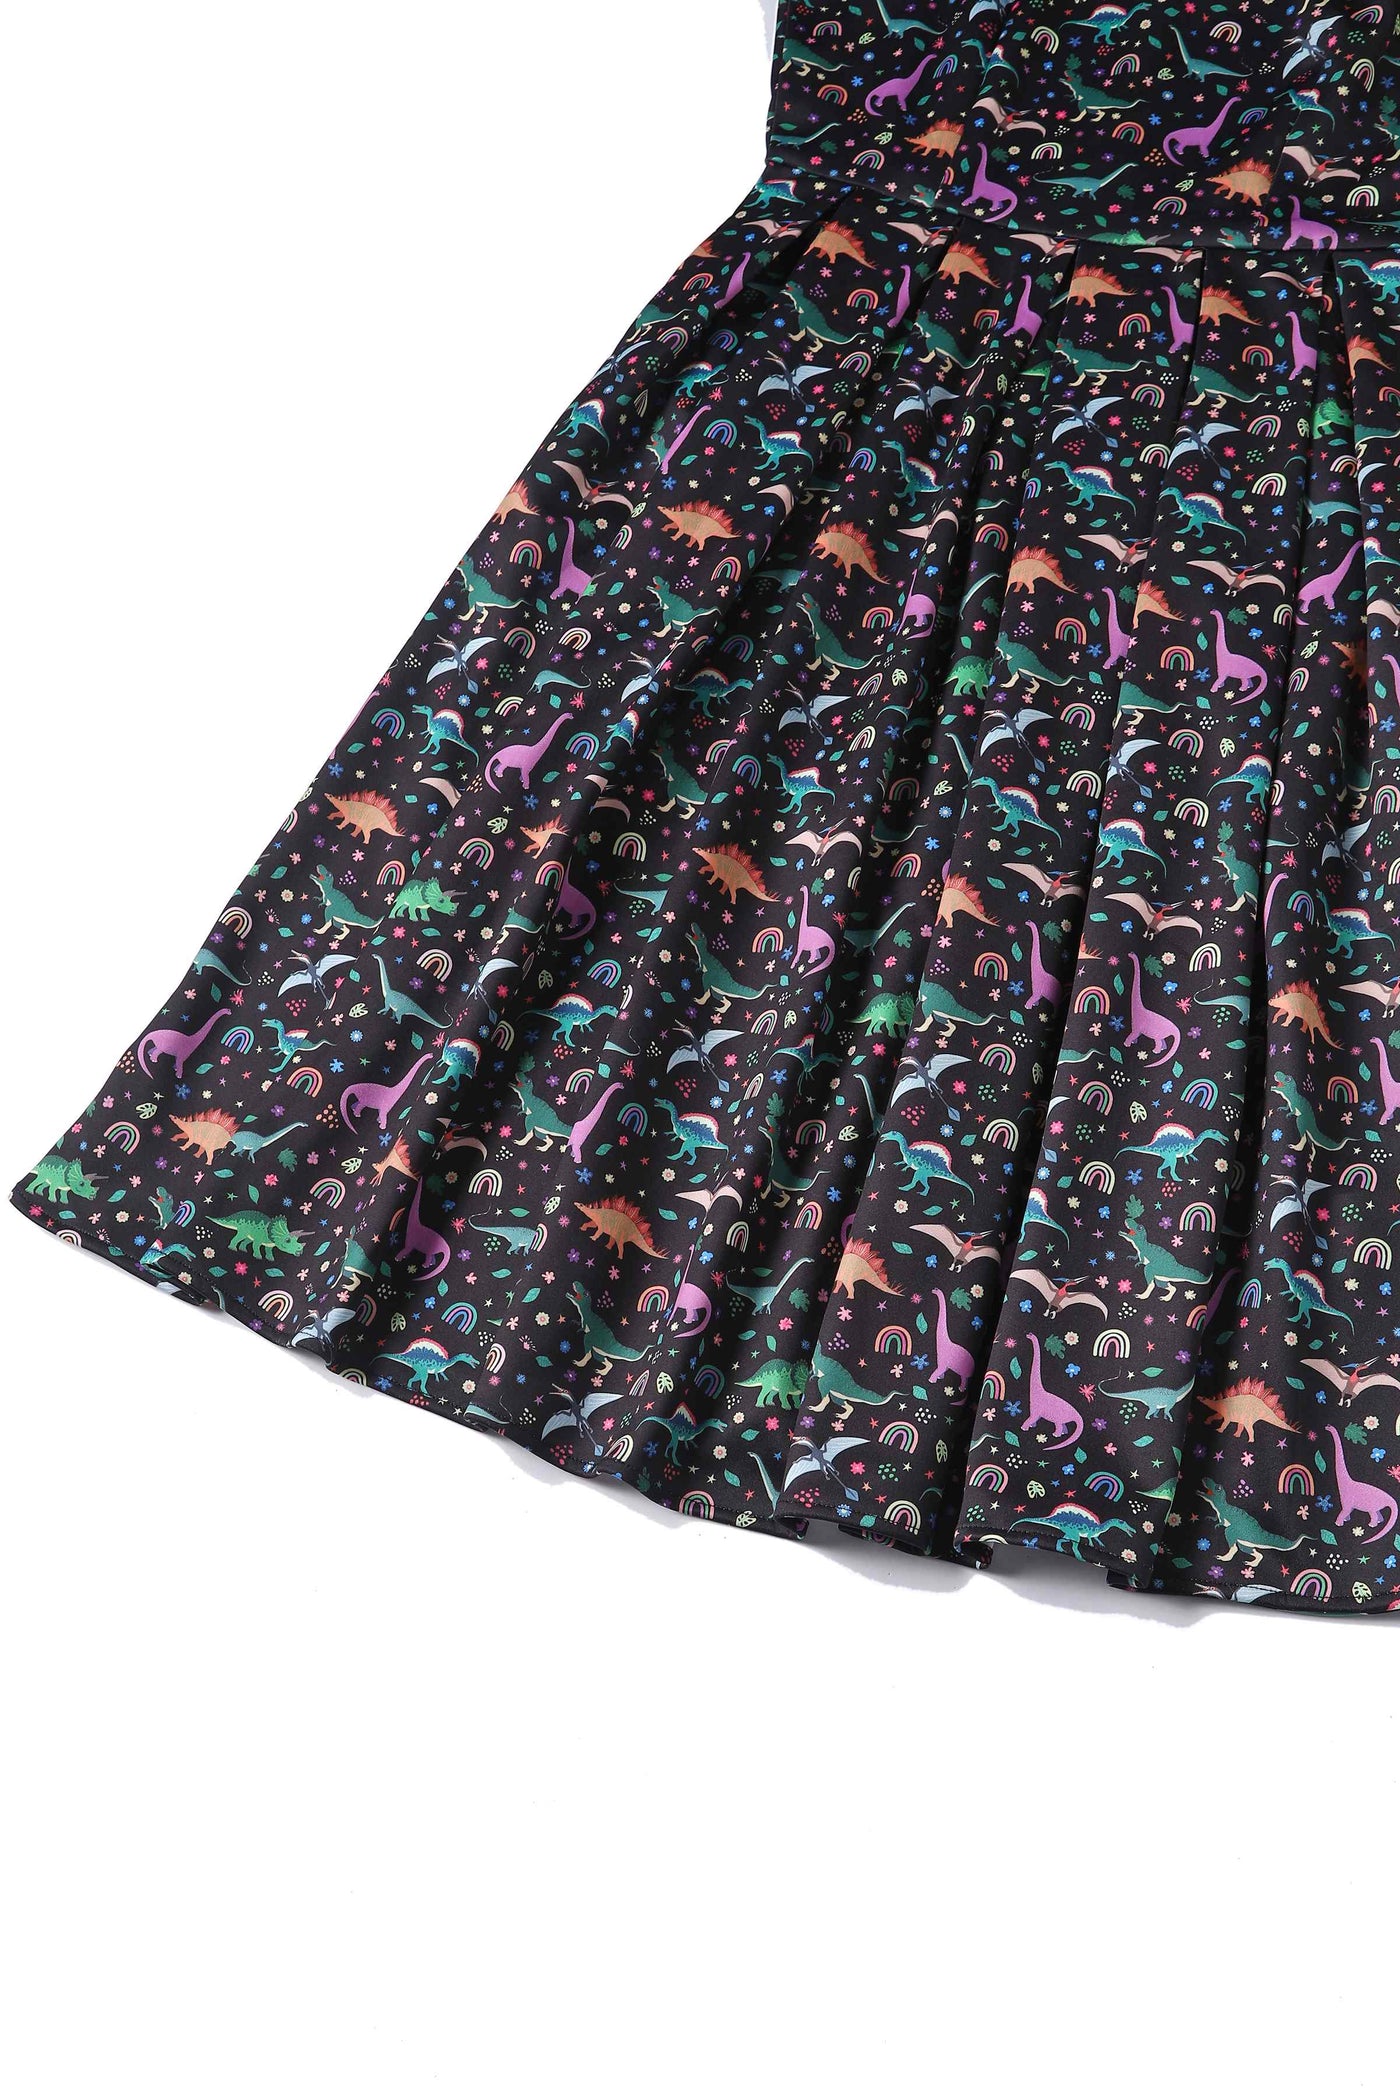 Close up view of Black Flared Dress in Dinosaur & Rainbow Print